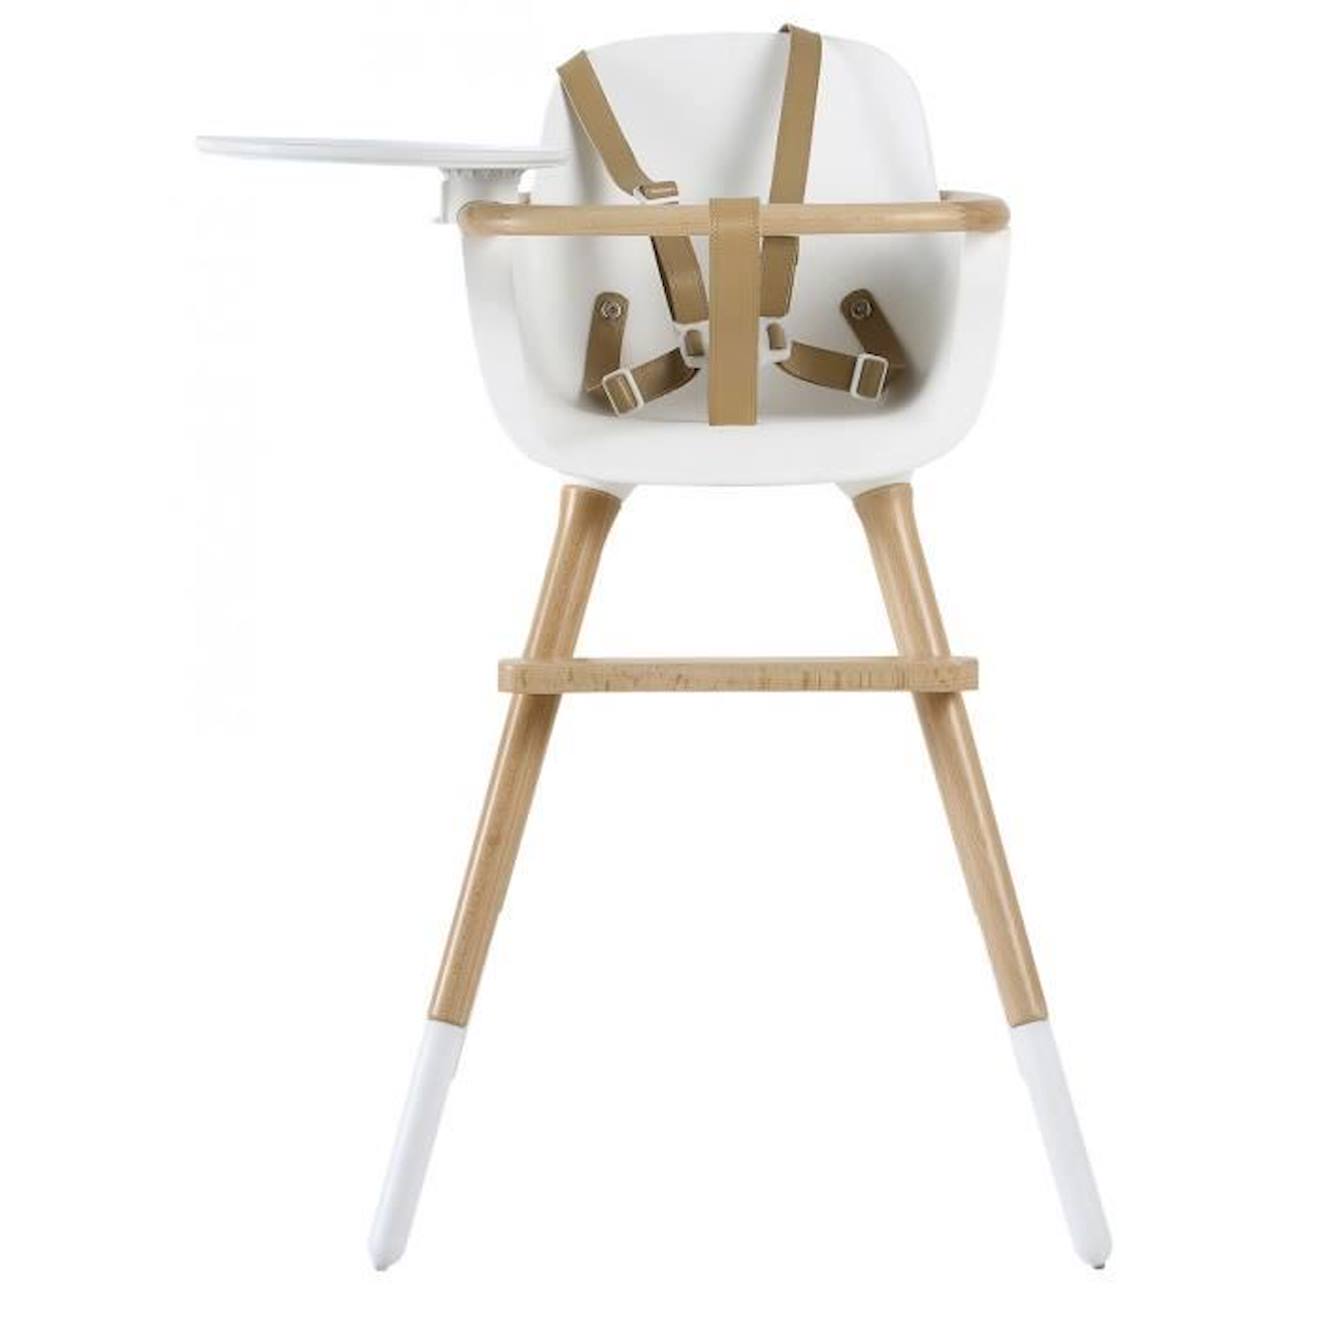 Siège De Table - Micuna - Ovo One Luxe T-1771 - Blanc - Mixte - 6 Mois - 30 Kg Blanc